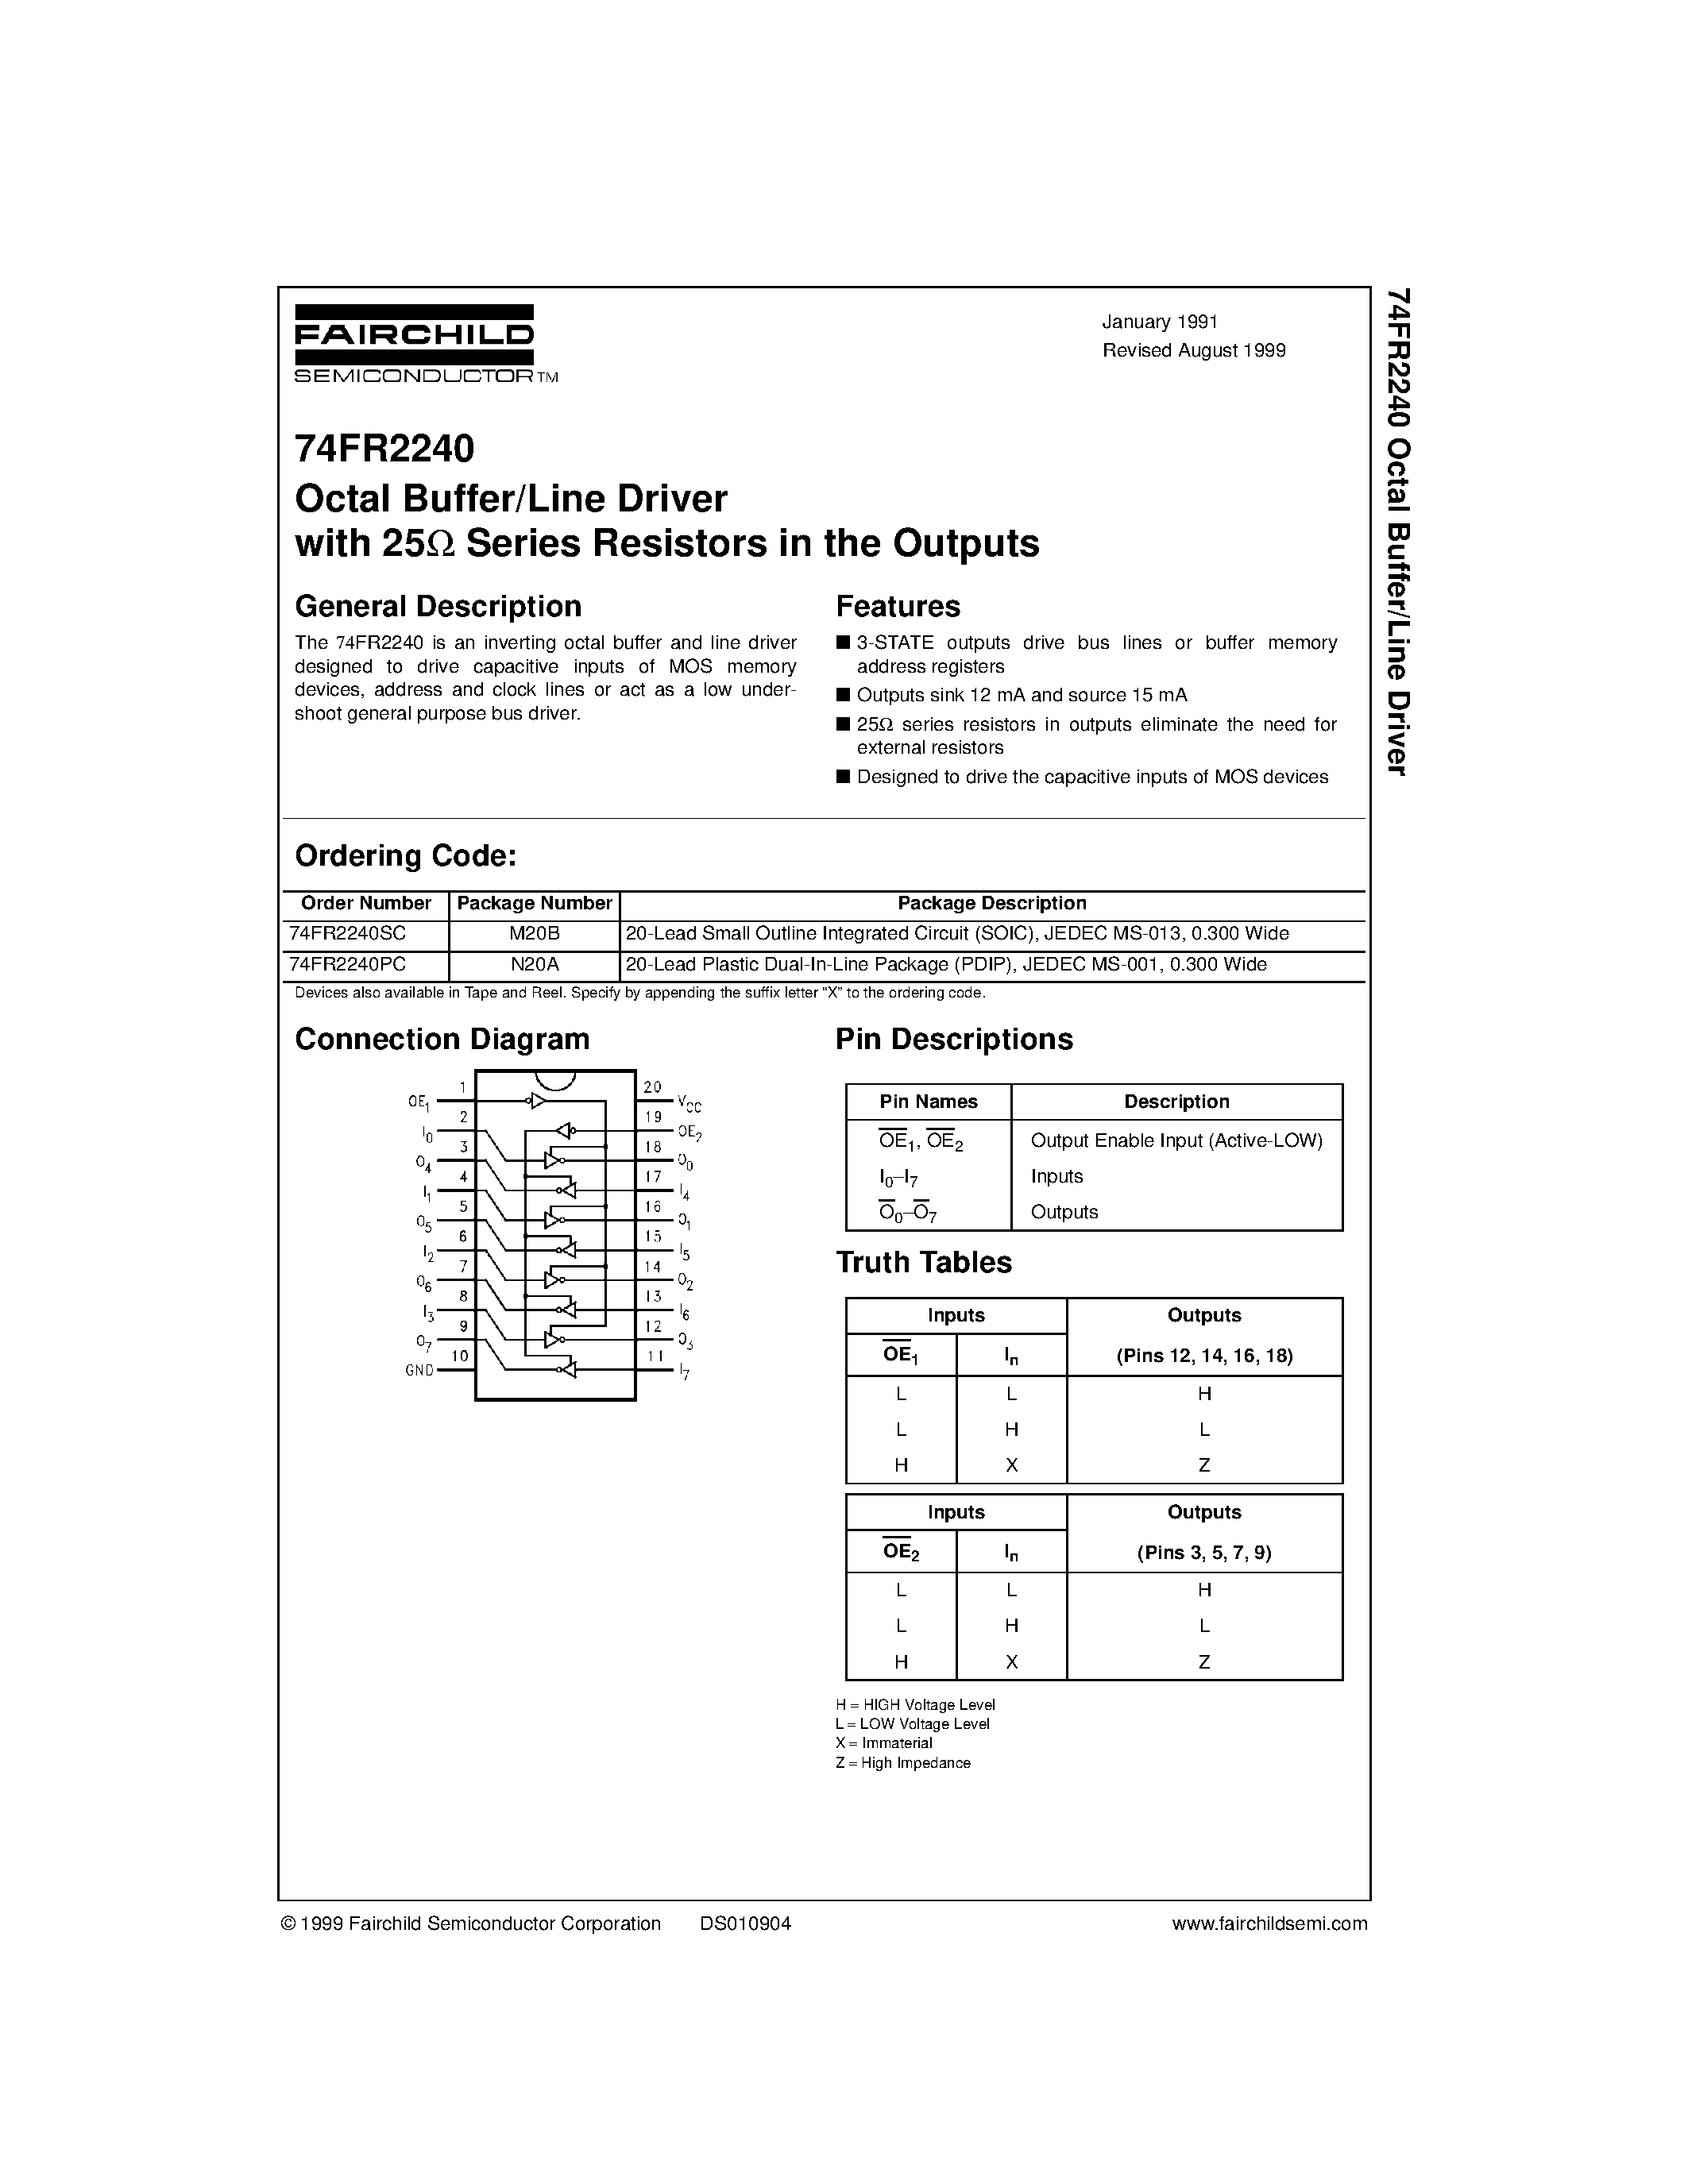 Datasheet 74FR2240PC - Octal Buffer/Line Driver with 25 Series Resistors in the Outputs page 1